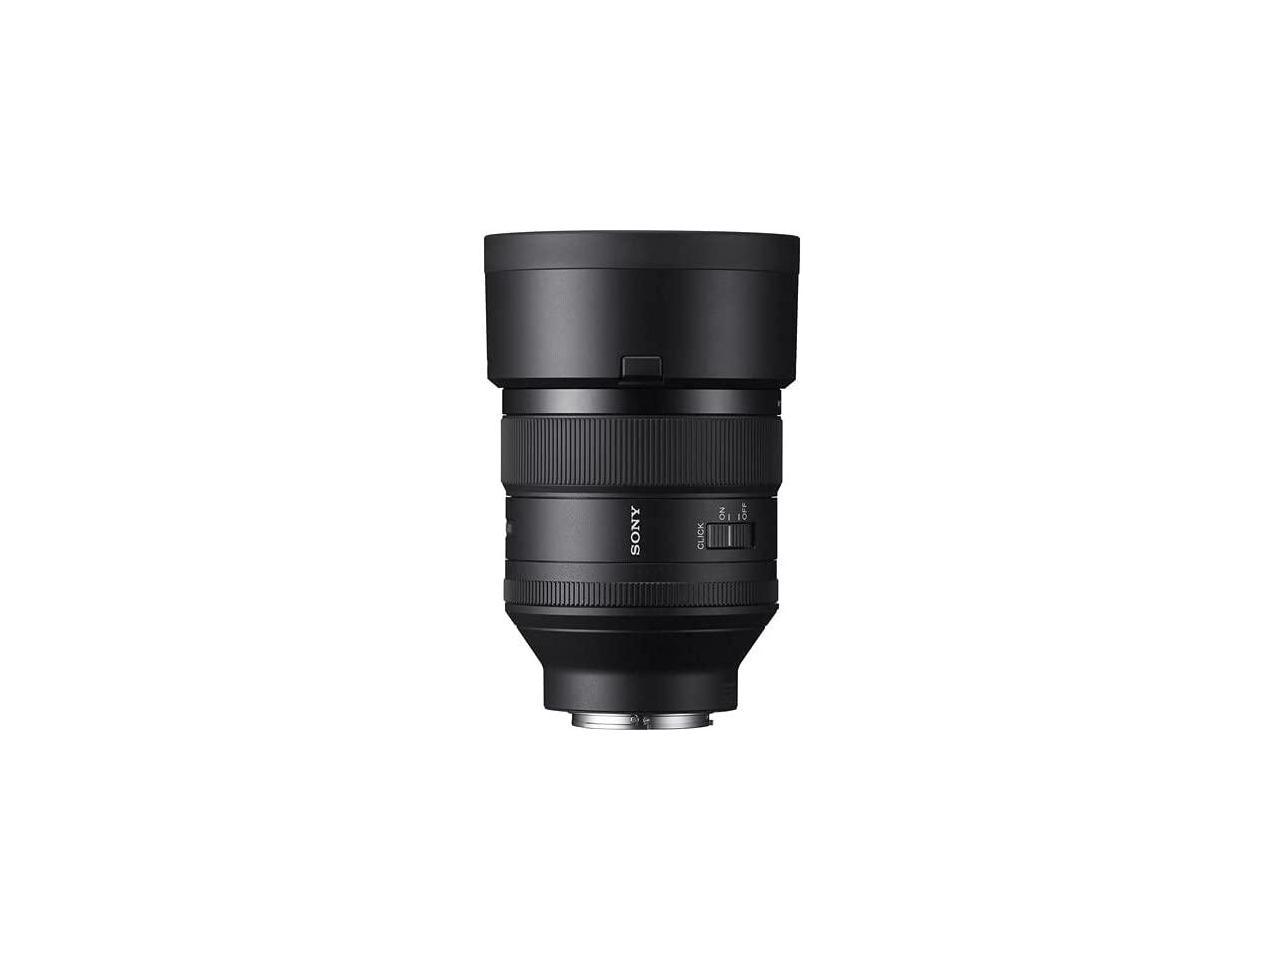 Sony FE 85mm F1.4 GM (SEL85F14GM) Camera Lens Bundle with 3PC Filter Kit